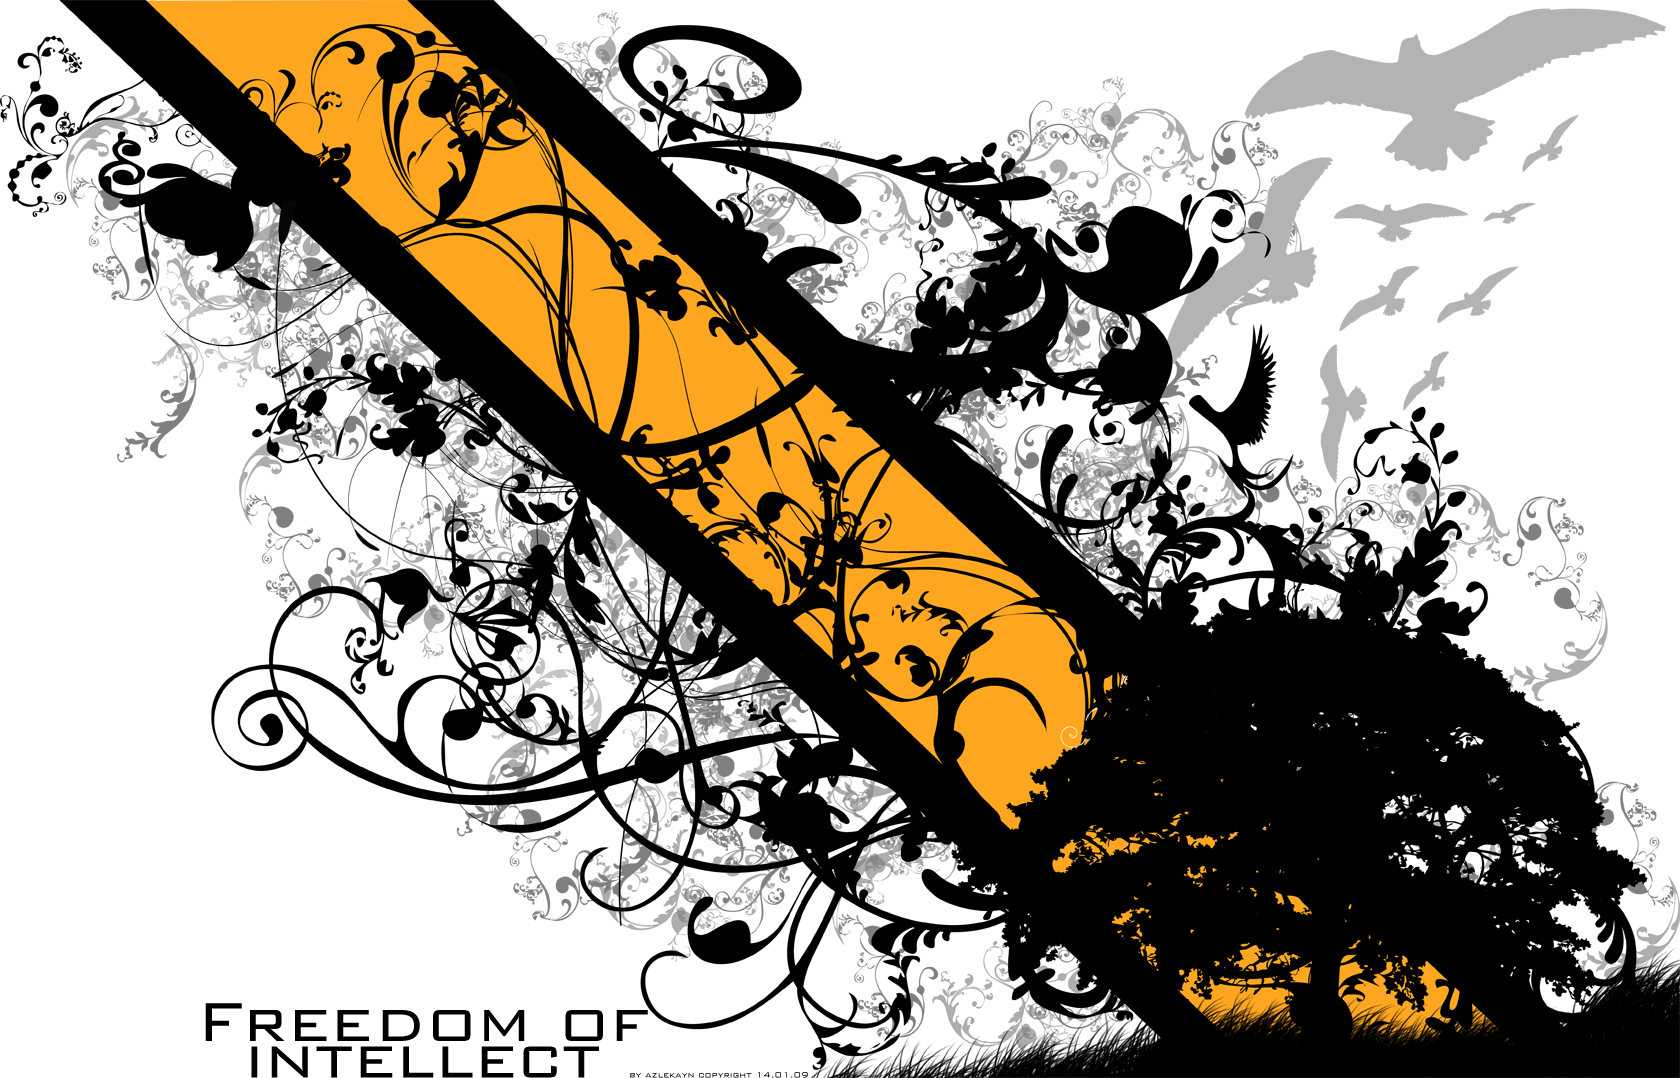 Abstract Black White Yellow Design Dom Of Intellect HD Wallpaper